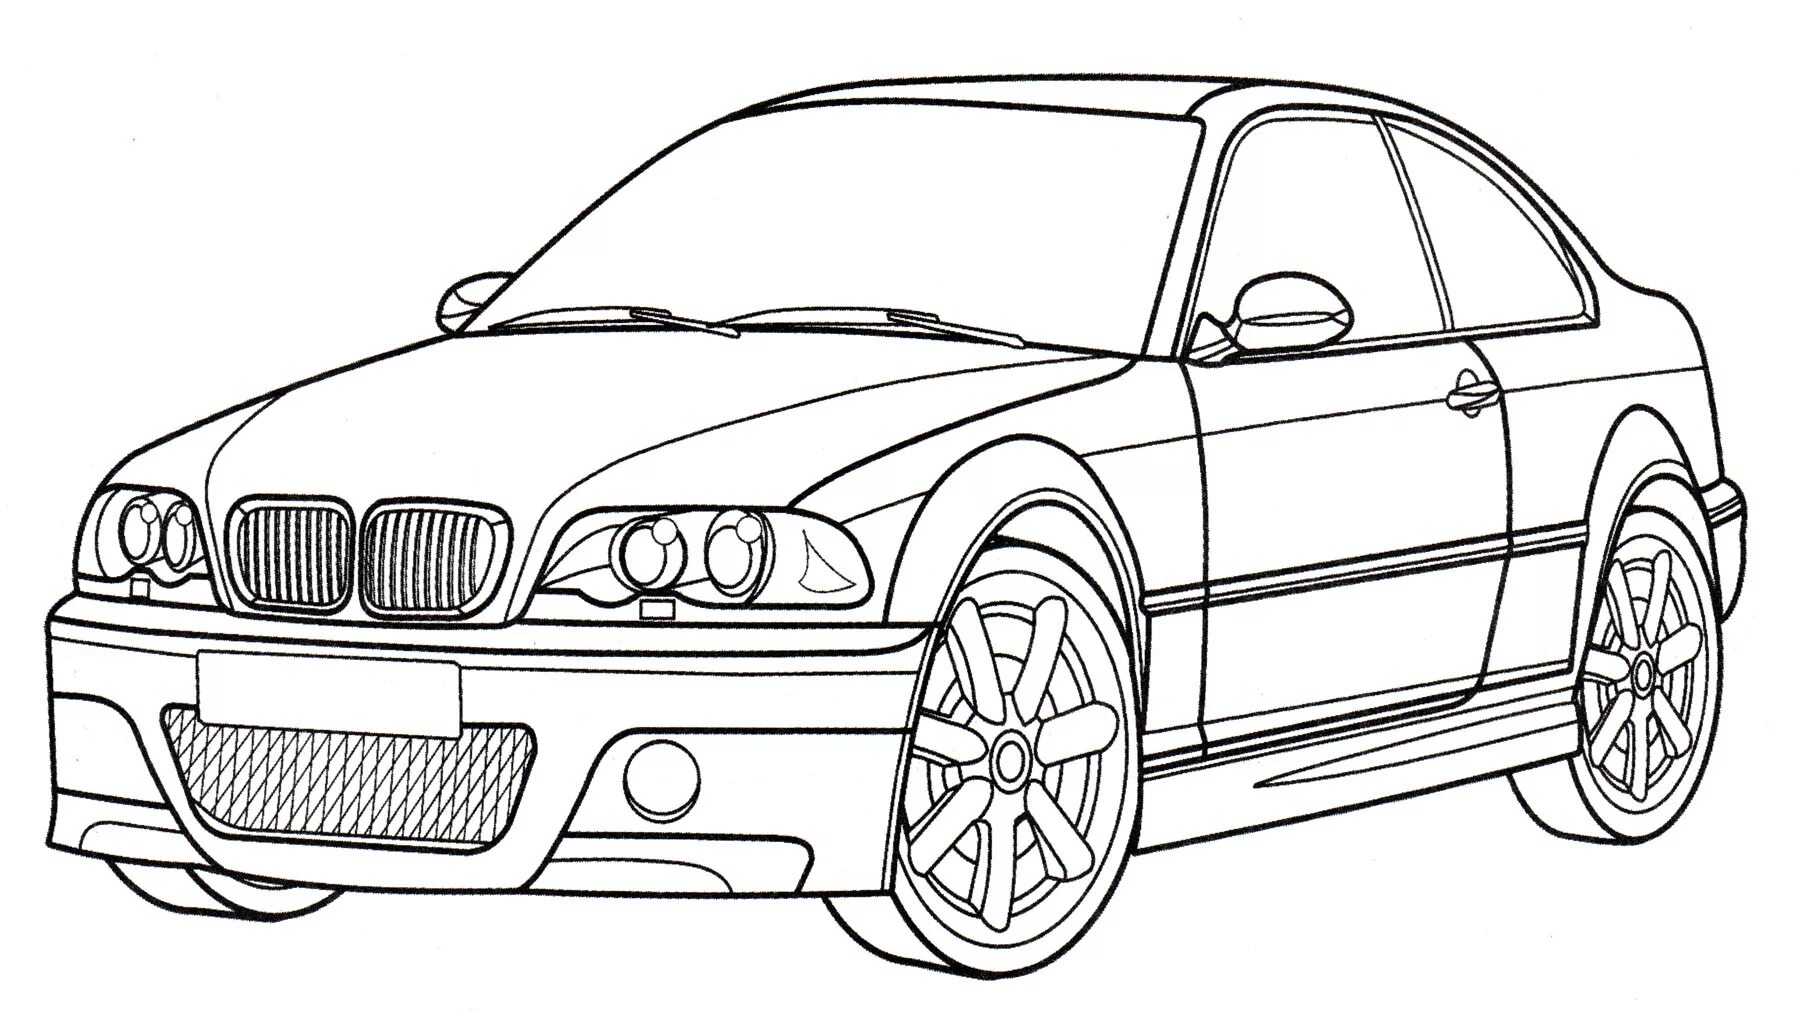 Bmw shiny racing coloring pages